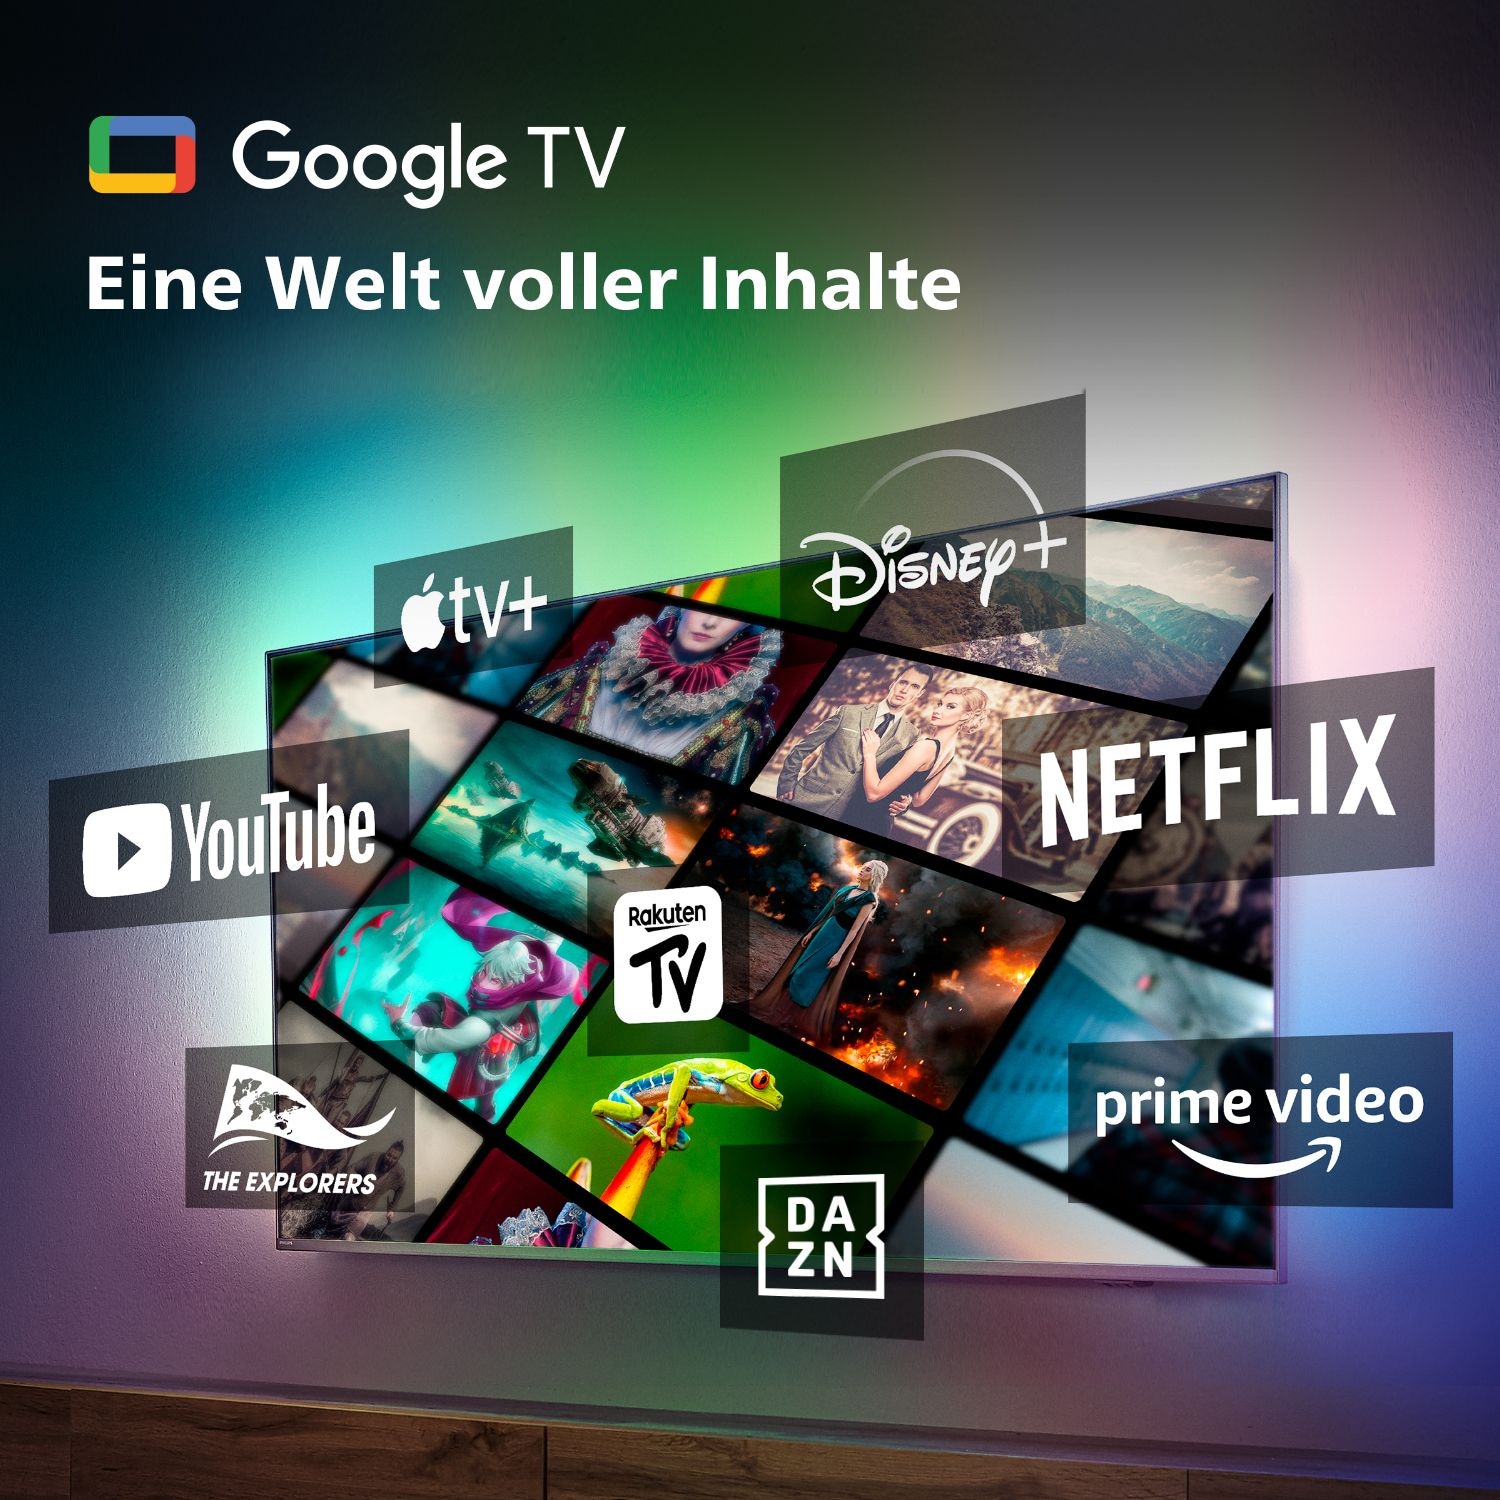 Philips LED-Fernseher »48OLED808/12«, 122 Ultra cm/48 4K OTTO TV bei Zoll, Smart-TV-Android online HD